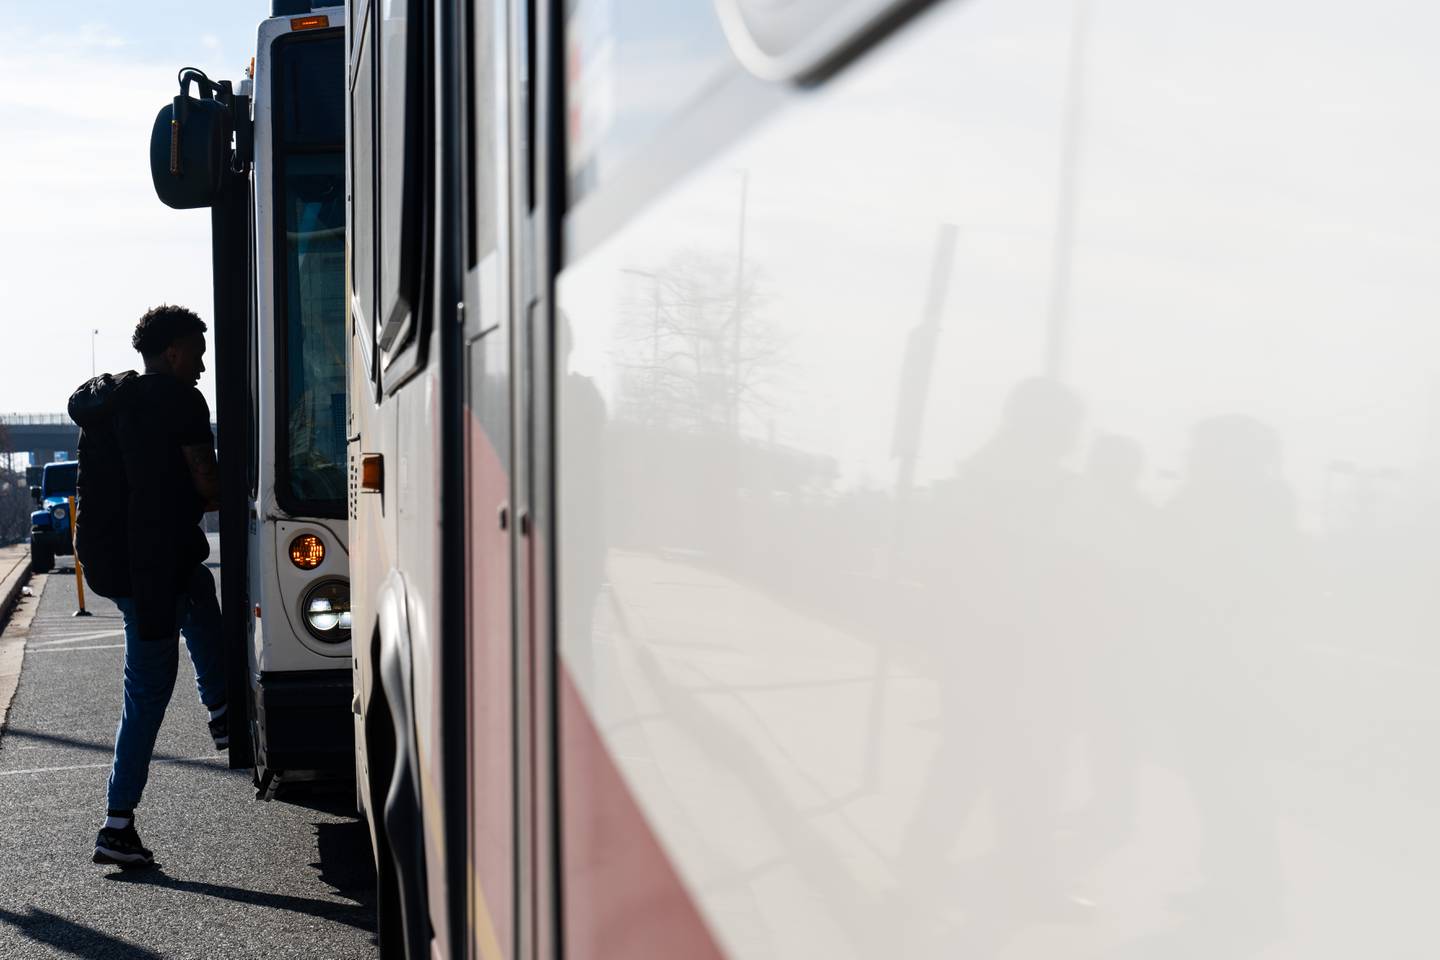 A rider, seen in silhouette, boards a shuttle bus.